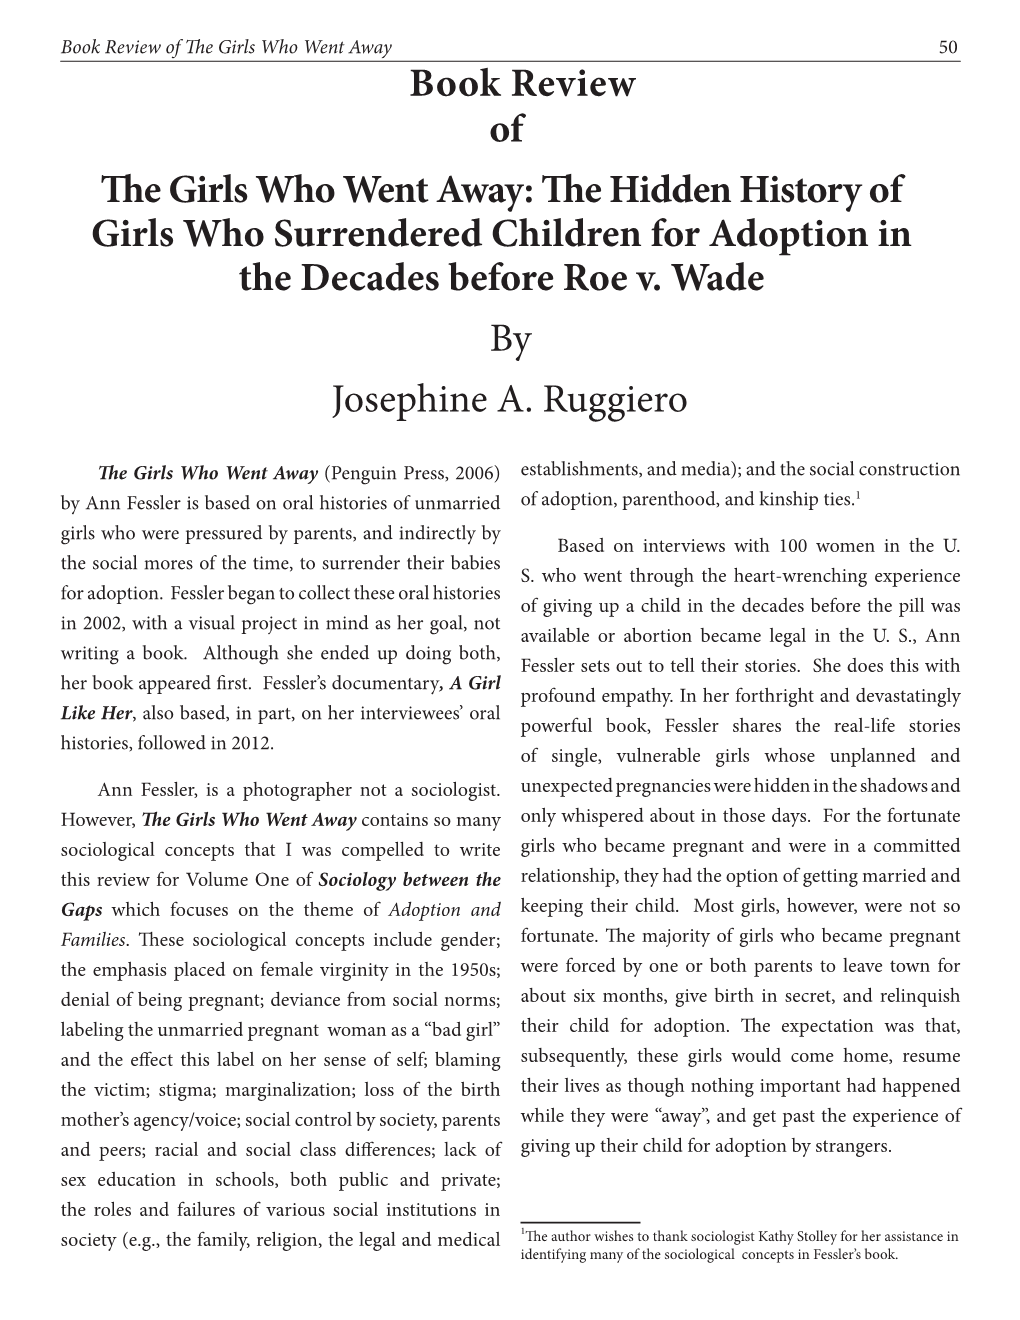 Book Review of the Girls Who Went Away